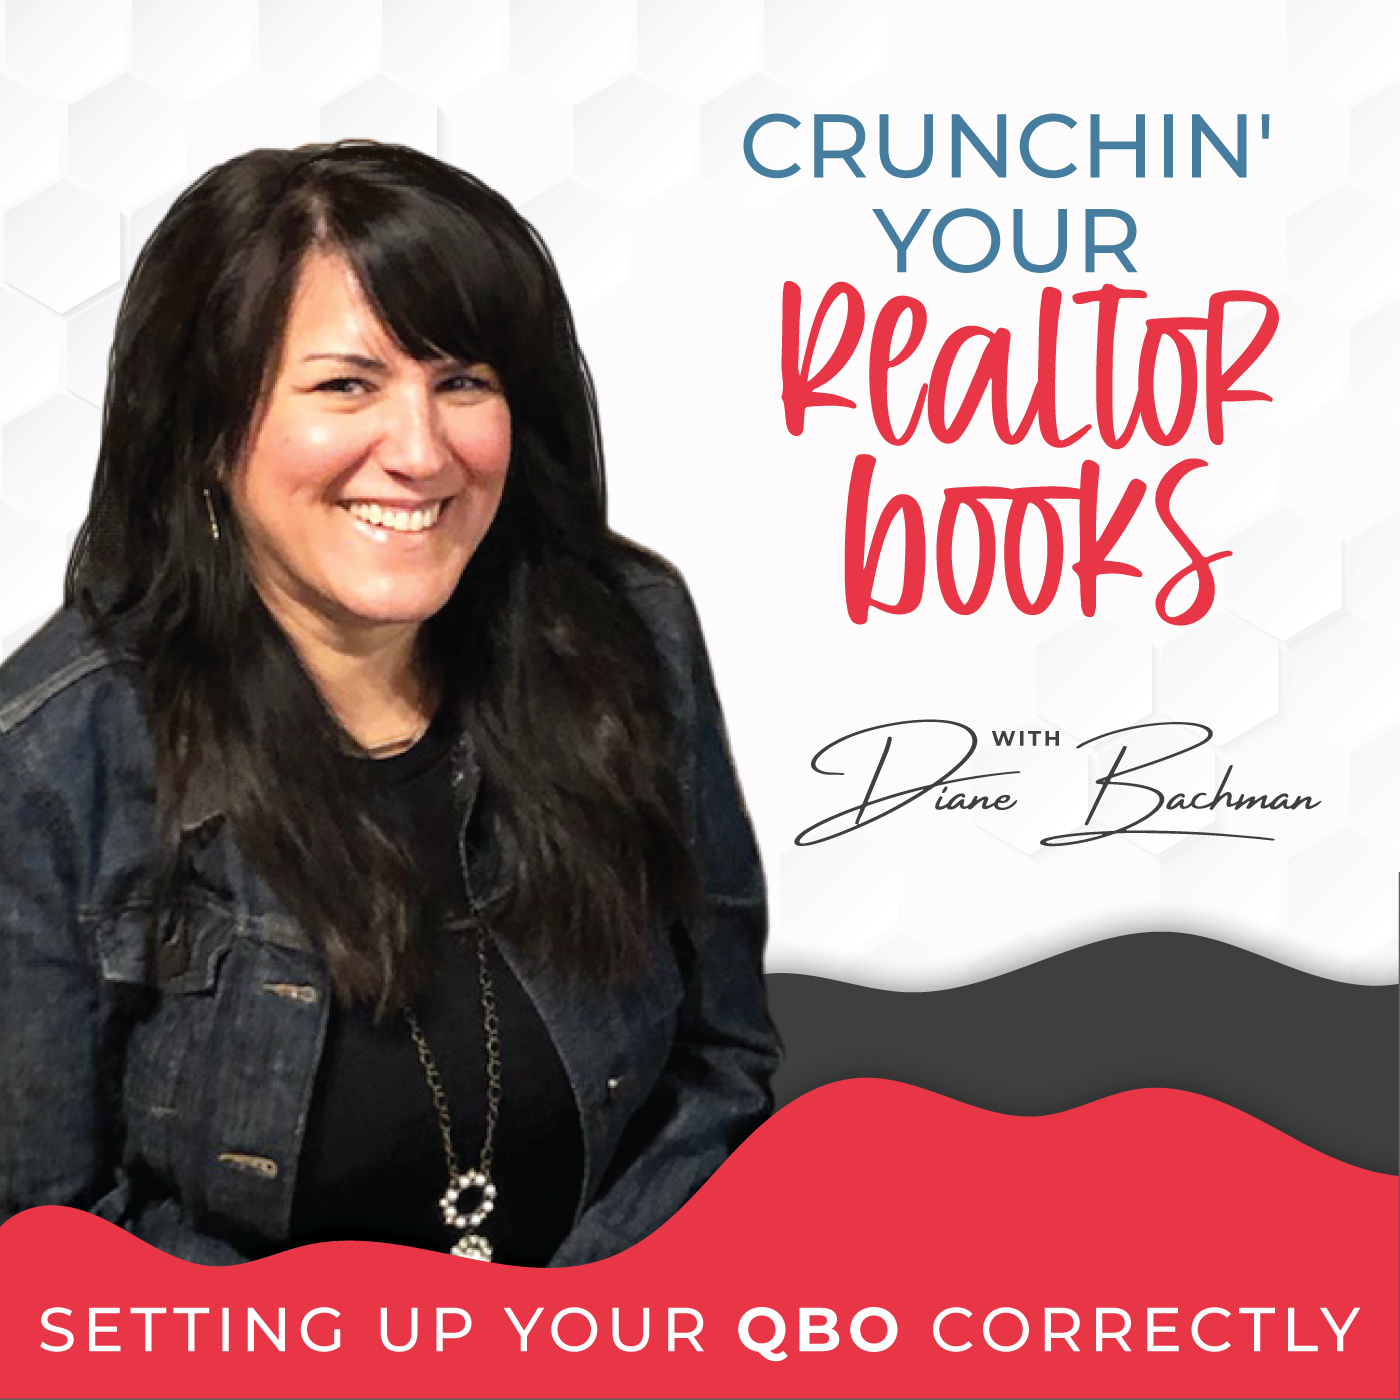 Crunchin' Your Realtor Book's, Setting Up Your QBO for Your Realtor Books